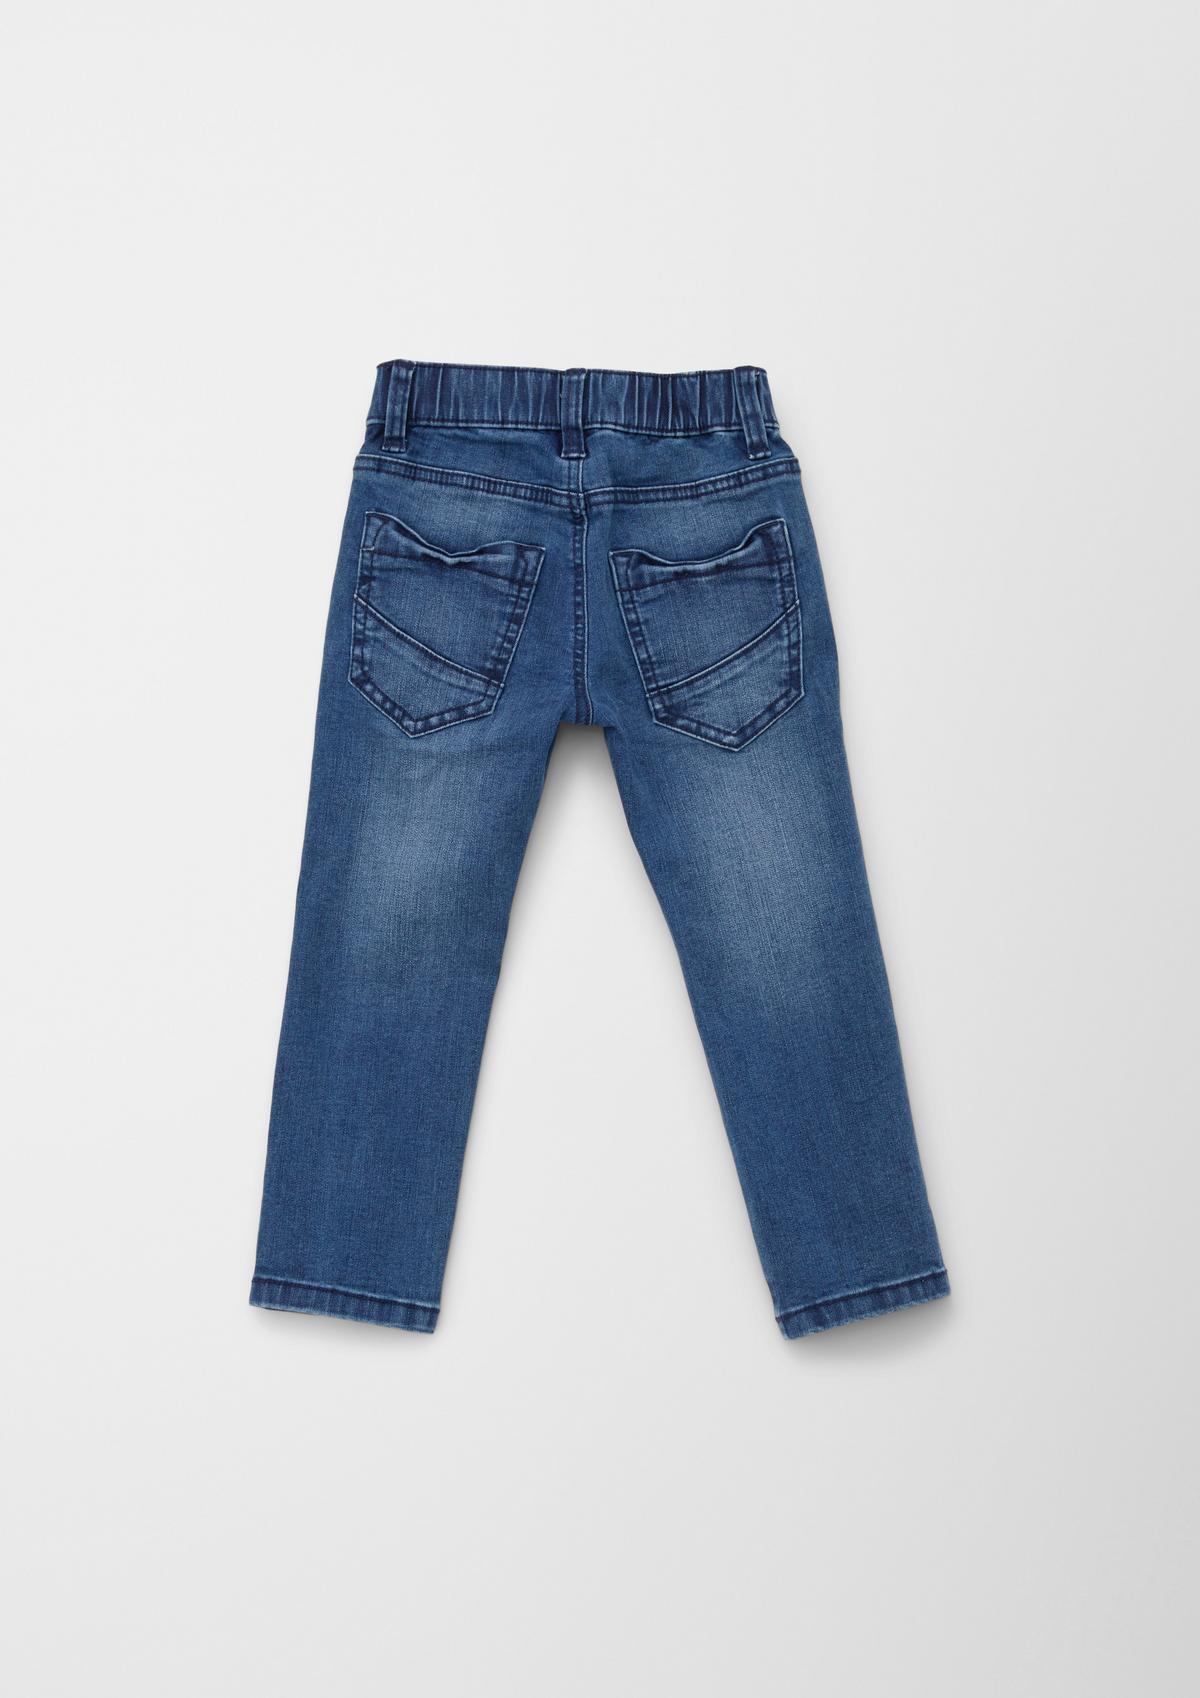 s.Oliver Jeans Shawn / Regular Fit / Mid Rise / Straight Leg